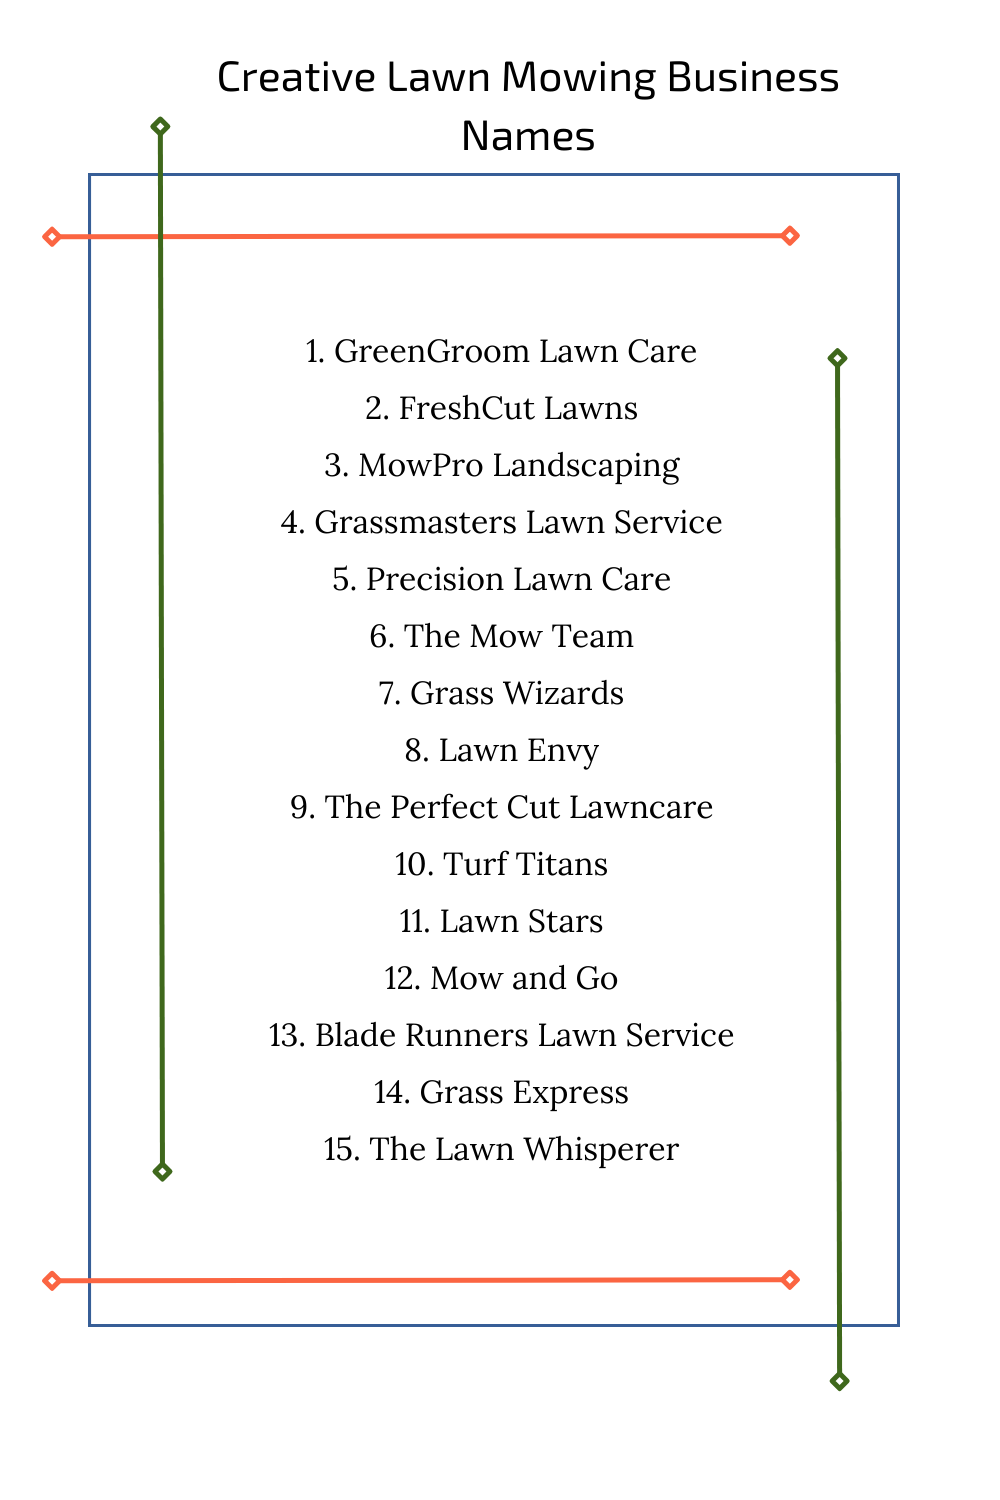 Creative Lawn Mowing Business Names